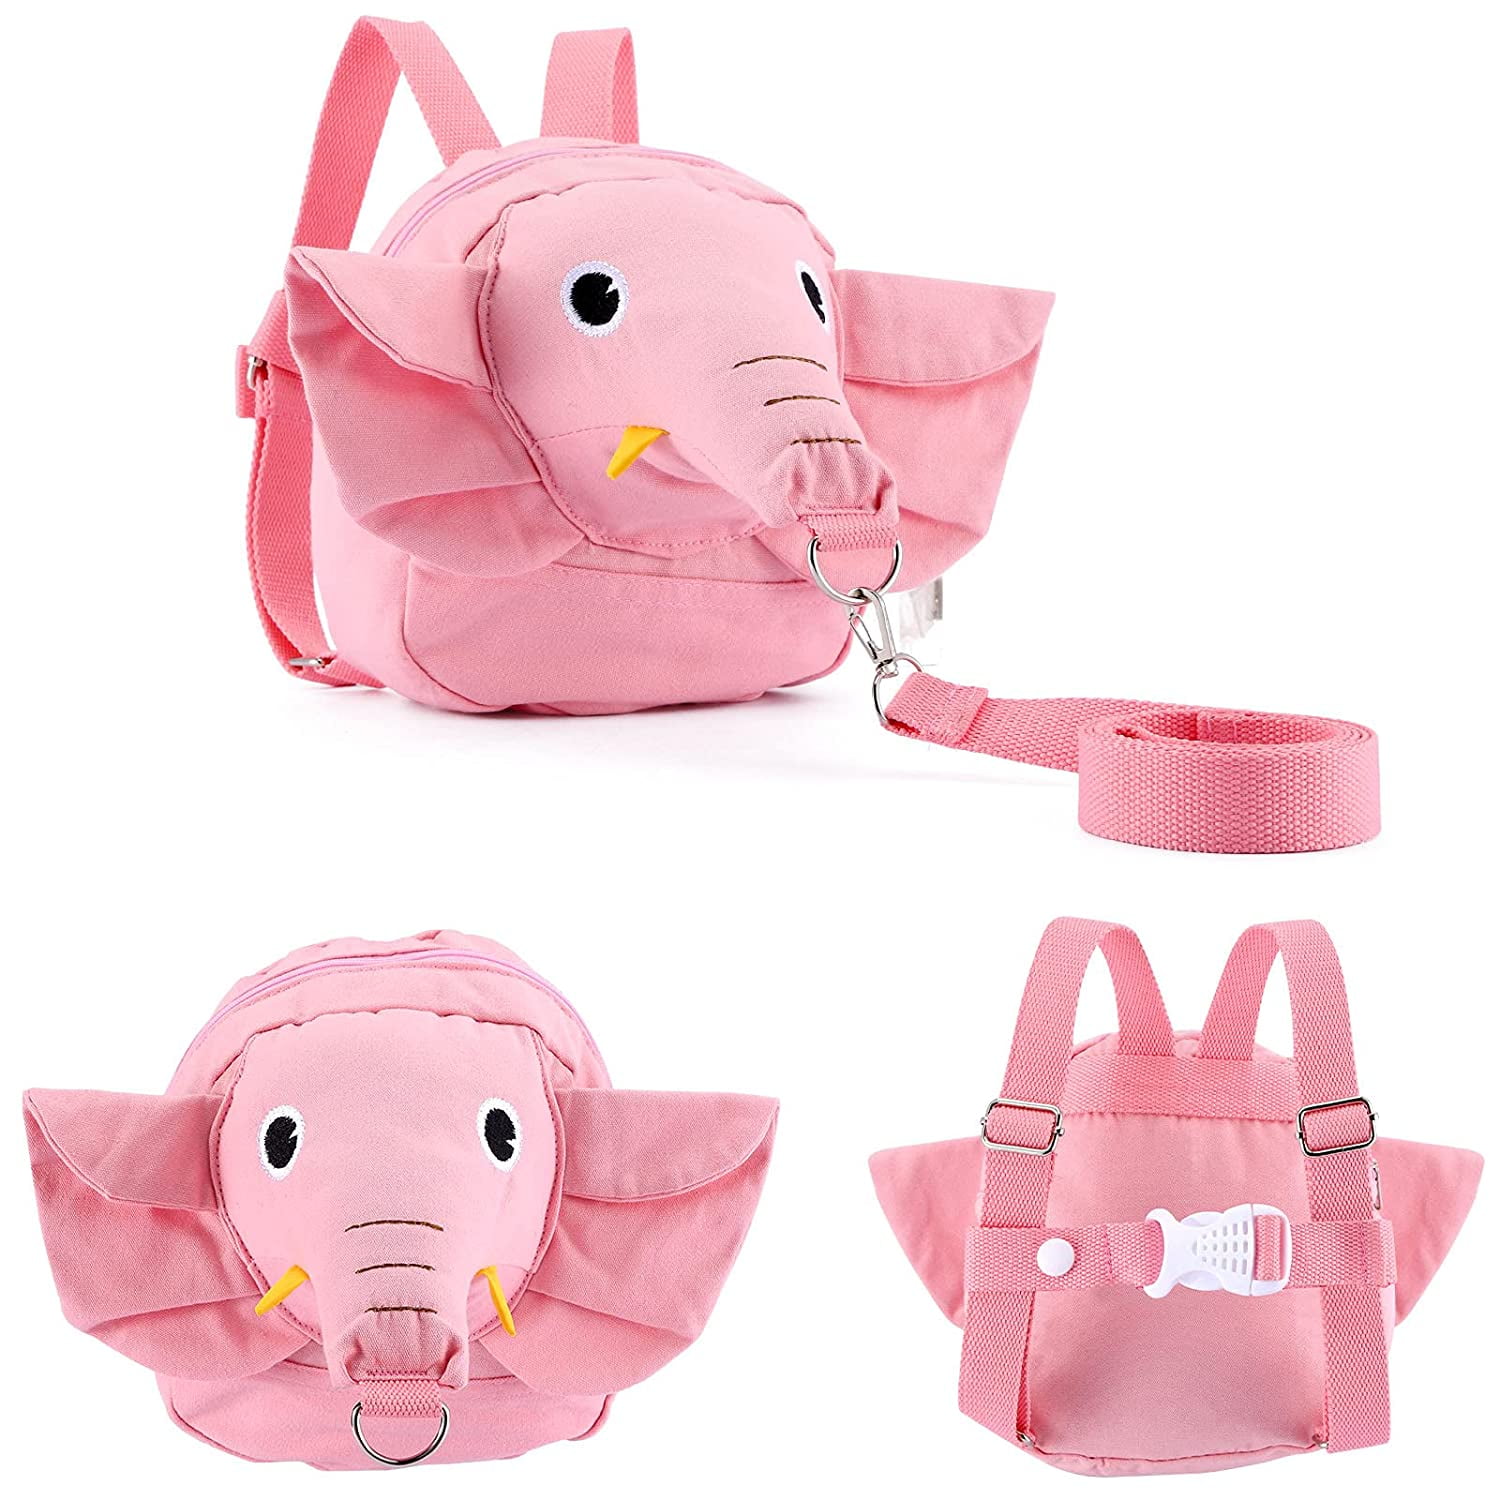 Pink Kitty Toddler Harness Backpack